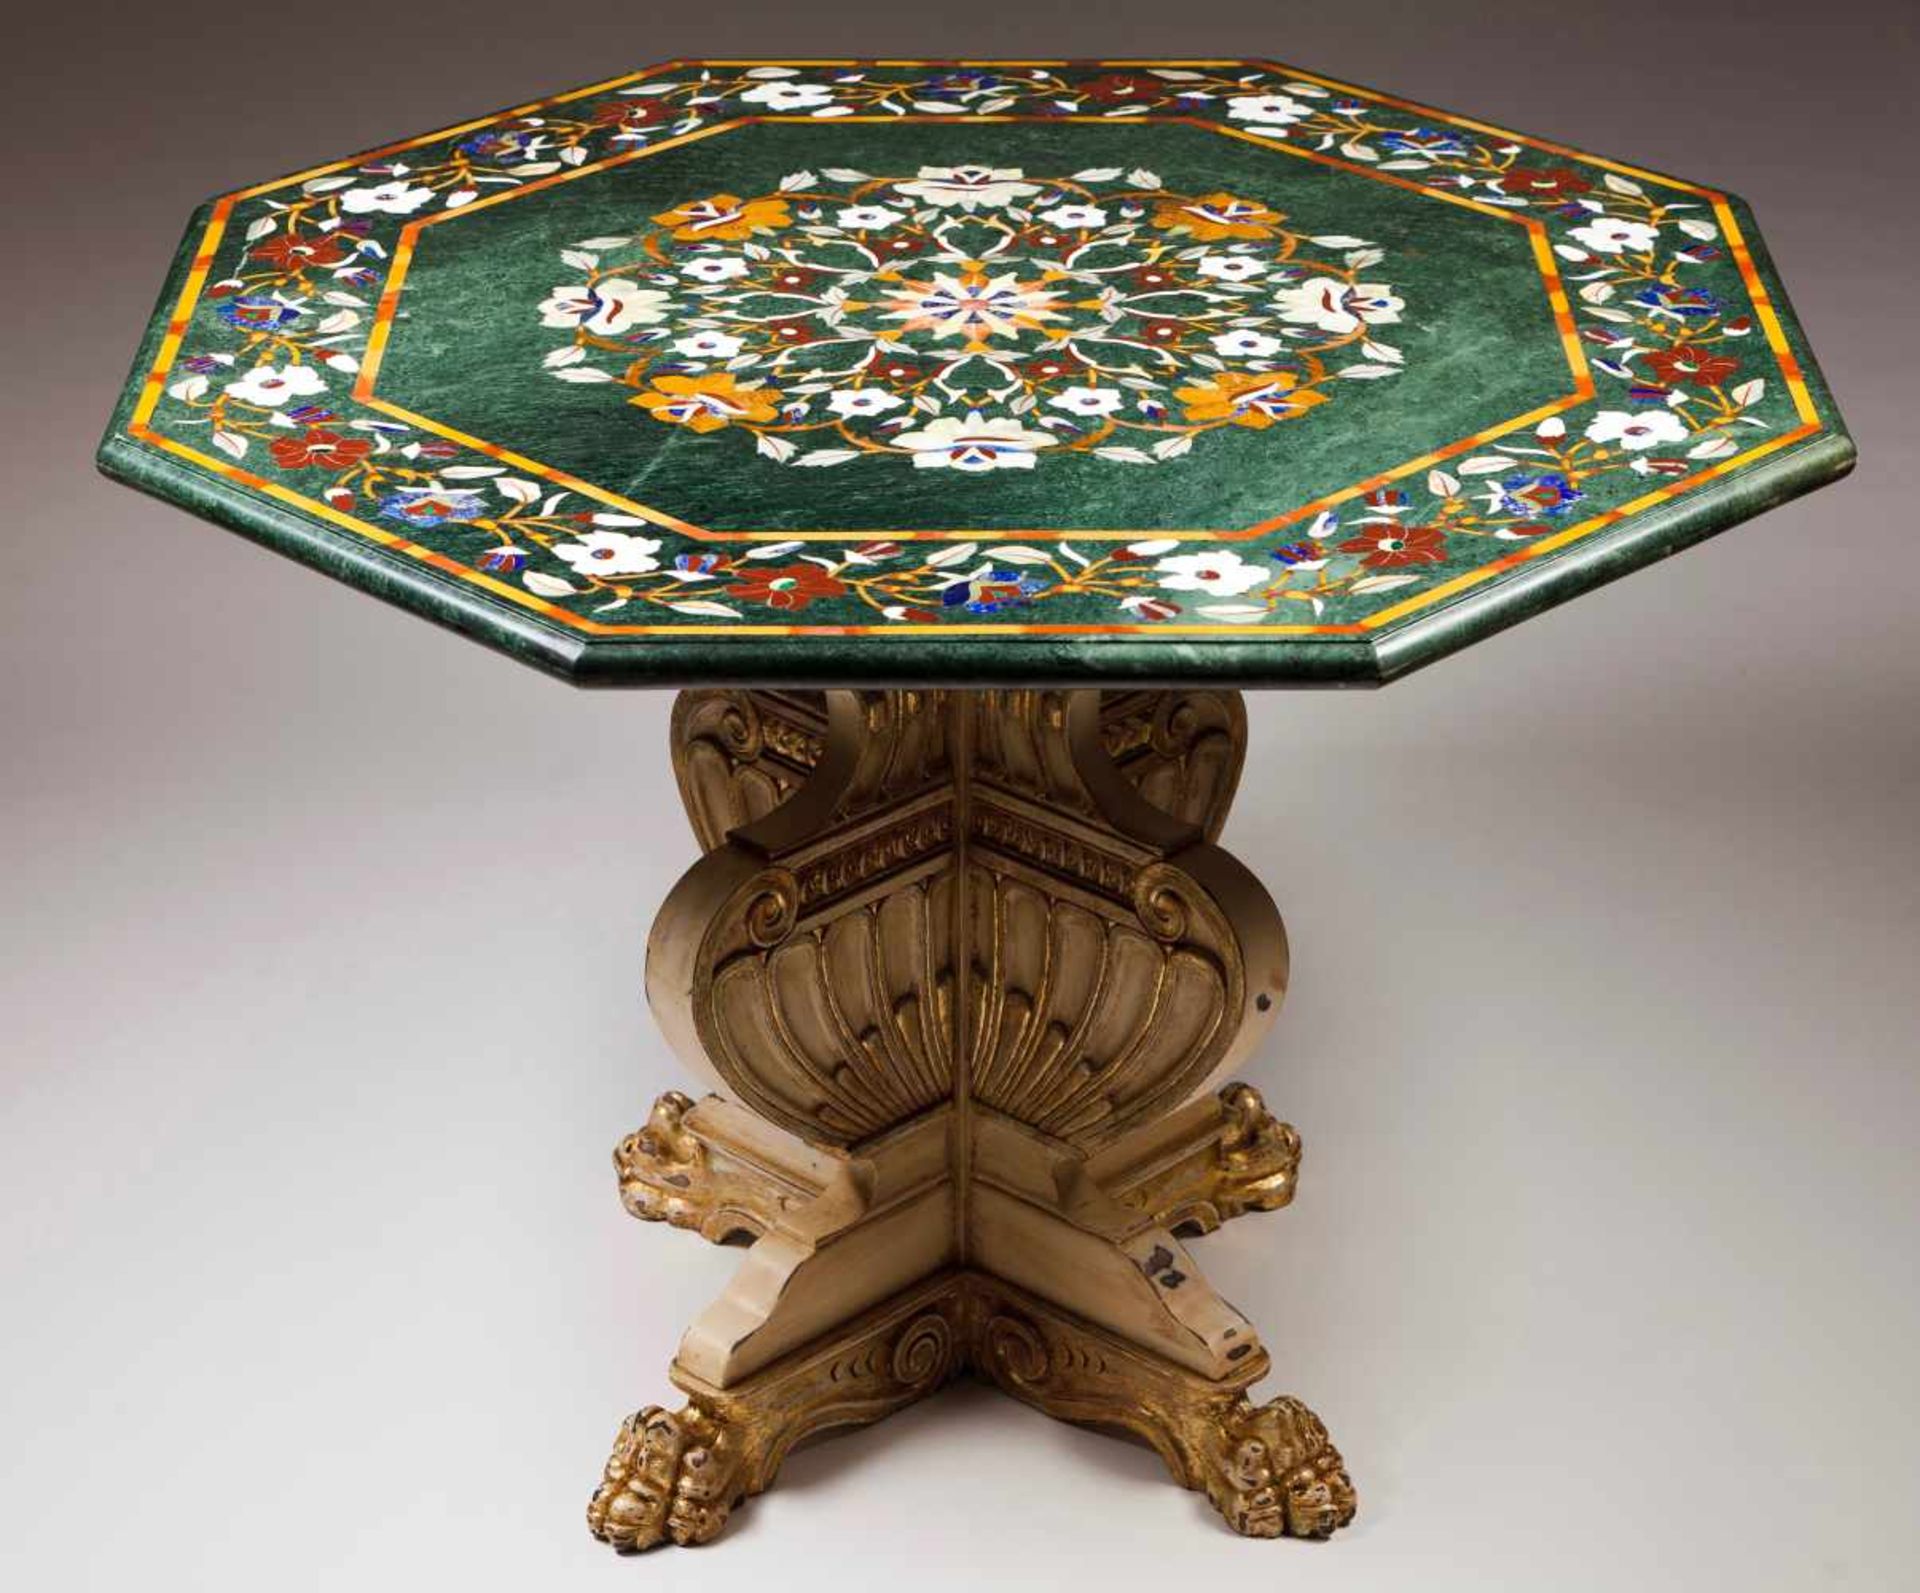 A centre tableOctagonal marble top with floral and foliage scroll "Pietra Dura" inlaysPainted and